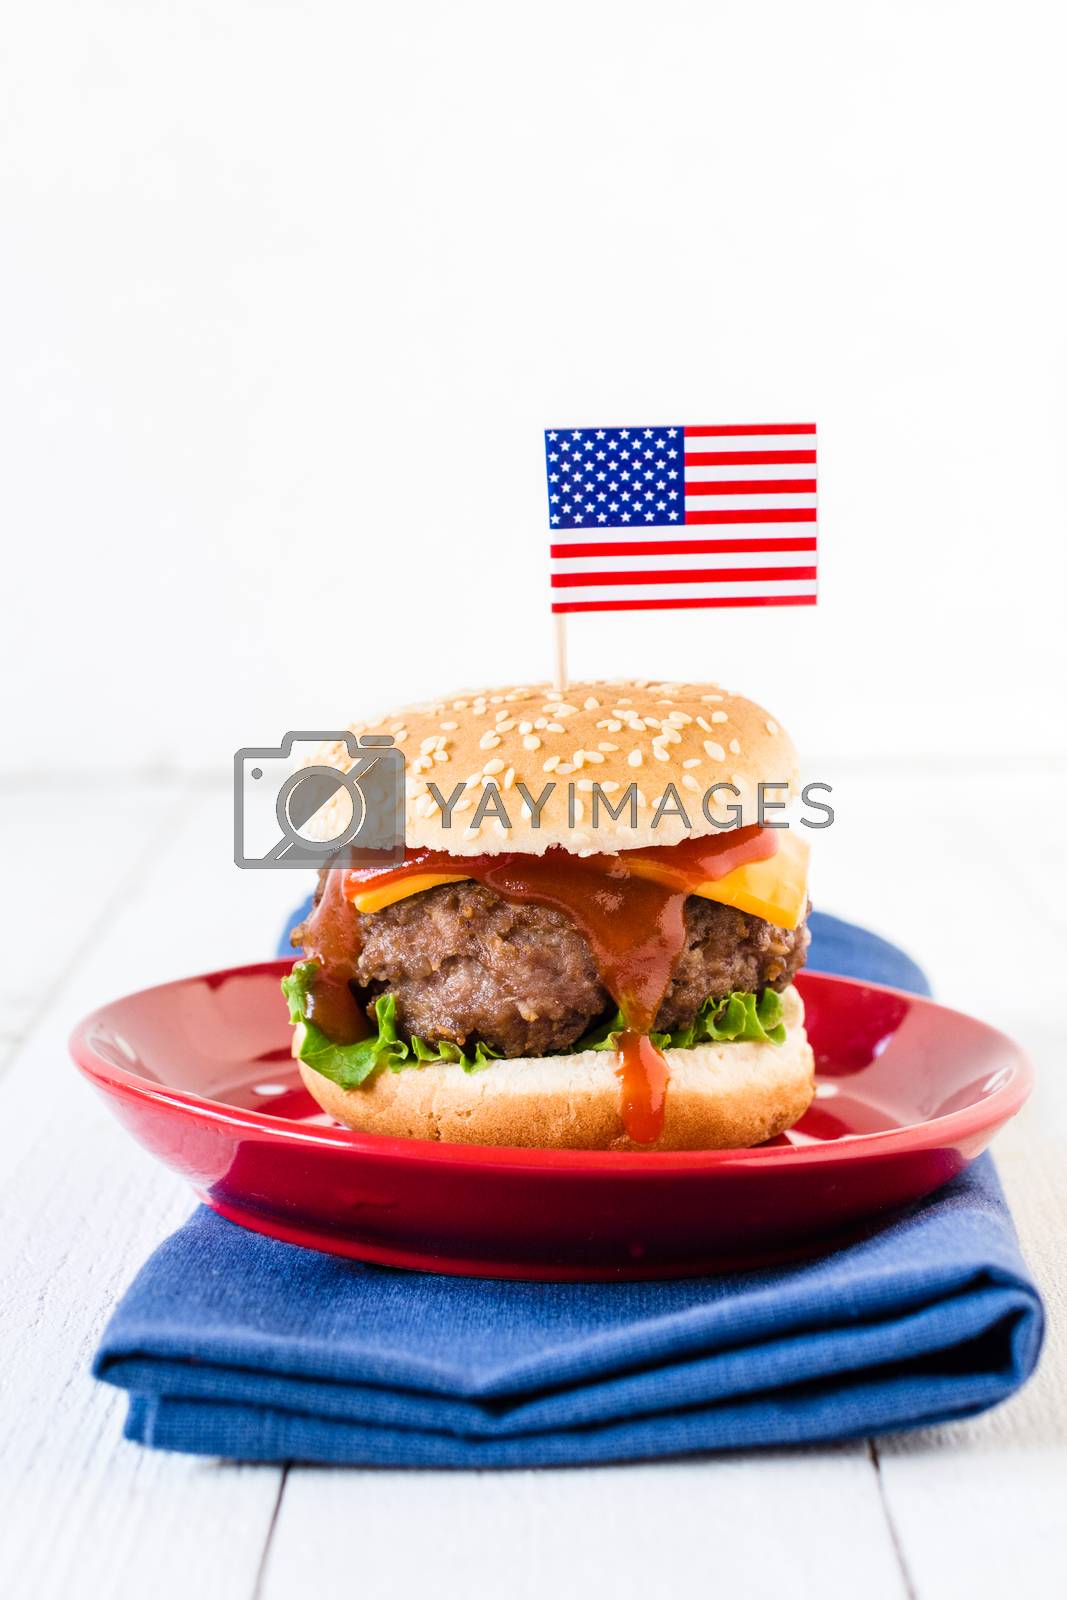 American mini beef burgers with cheese and USA flags,selective focus and blank space